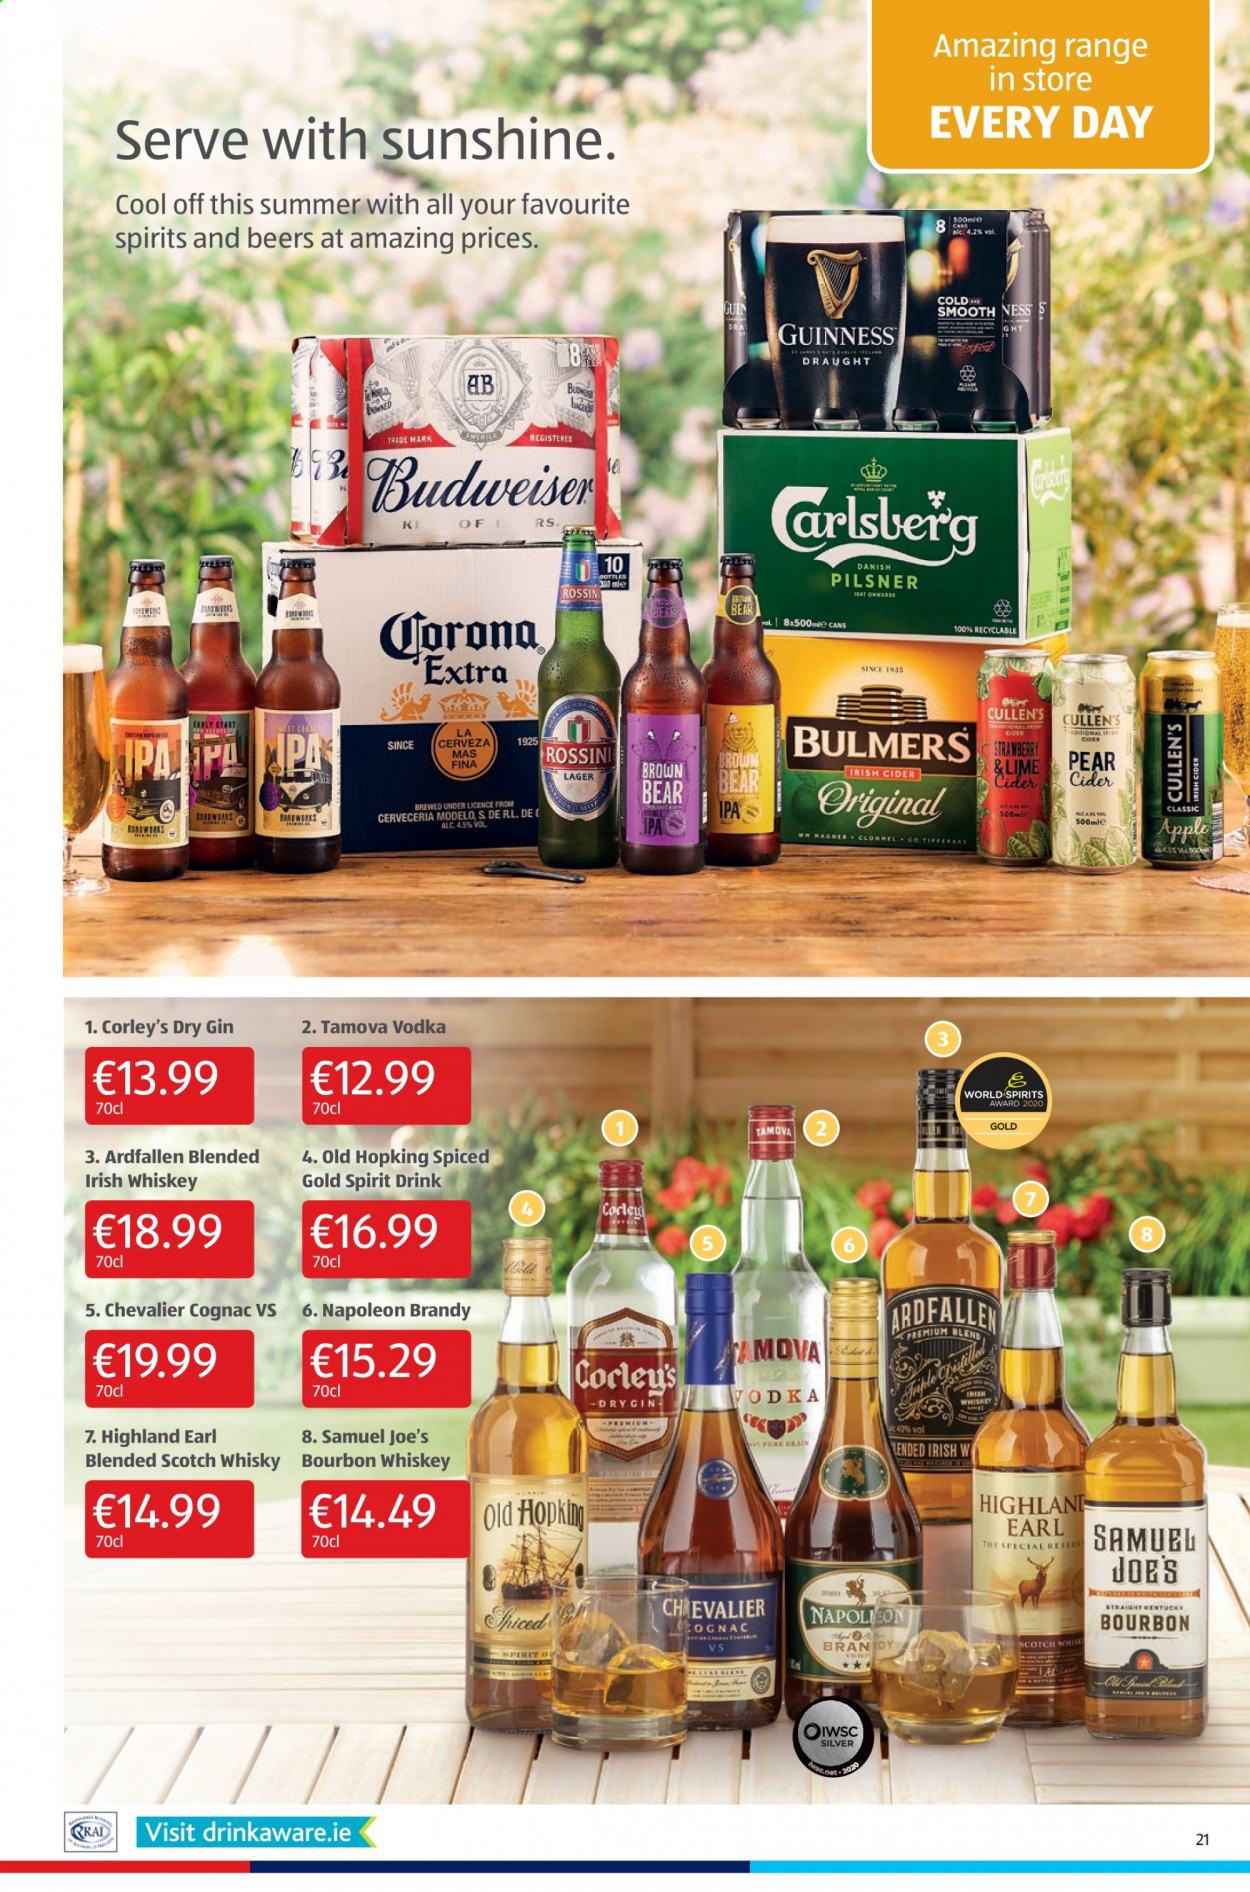 thumbnail - Aldi offer  - 24.06.2021 - 30.06.2021 - Sales products - pears, Sunshine, bourbon, brandy, cognac, gin, vodka, whiskey, irish whiskey, bourbon whiskey, scotch whisky, whisky, cider, beer, Budweiser, Corona Extra, Guinness, Lager, IPA, Modelo. Page 21.